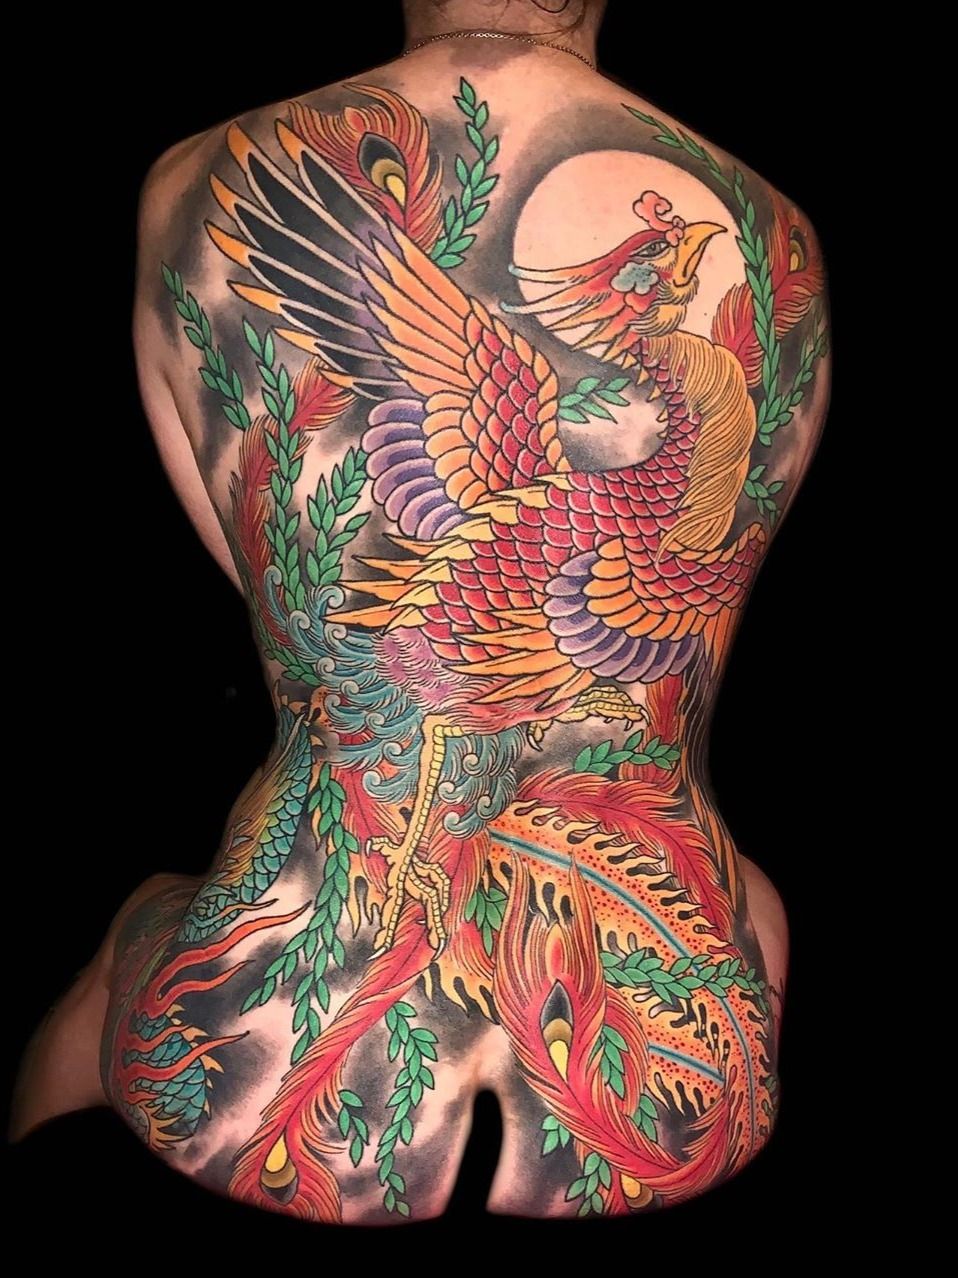 Tattoo uploaded by Emil Forsmann • Crazy Japanese Phoenix back piece in  lots of colors! #japanesetattoo #japanese #backpiece #japanesebodysuit # phoenix #colorful • Tattoodo